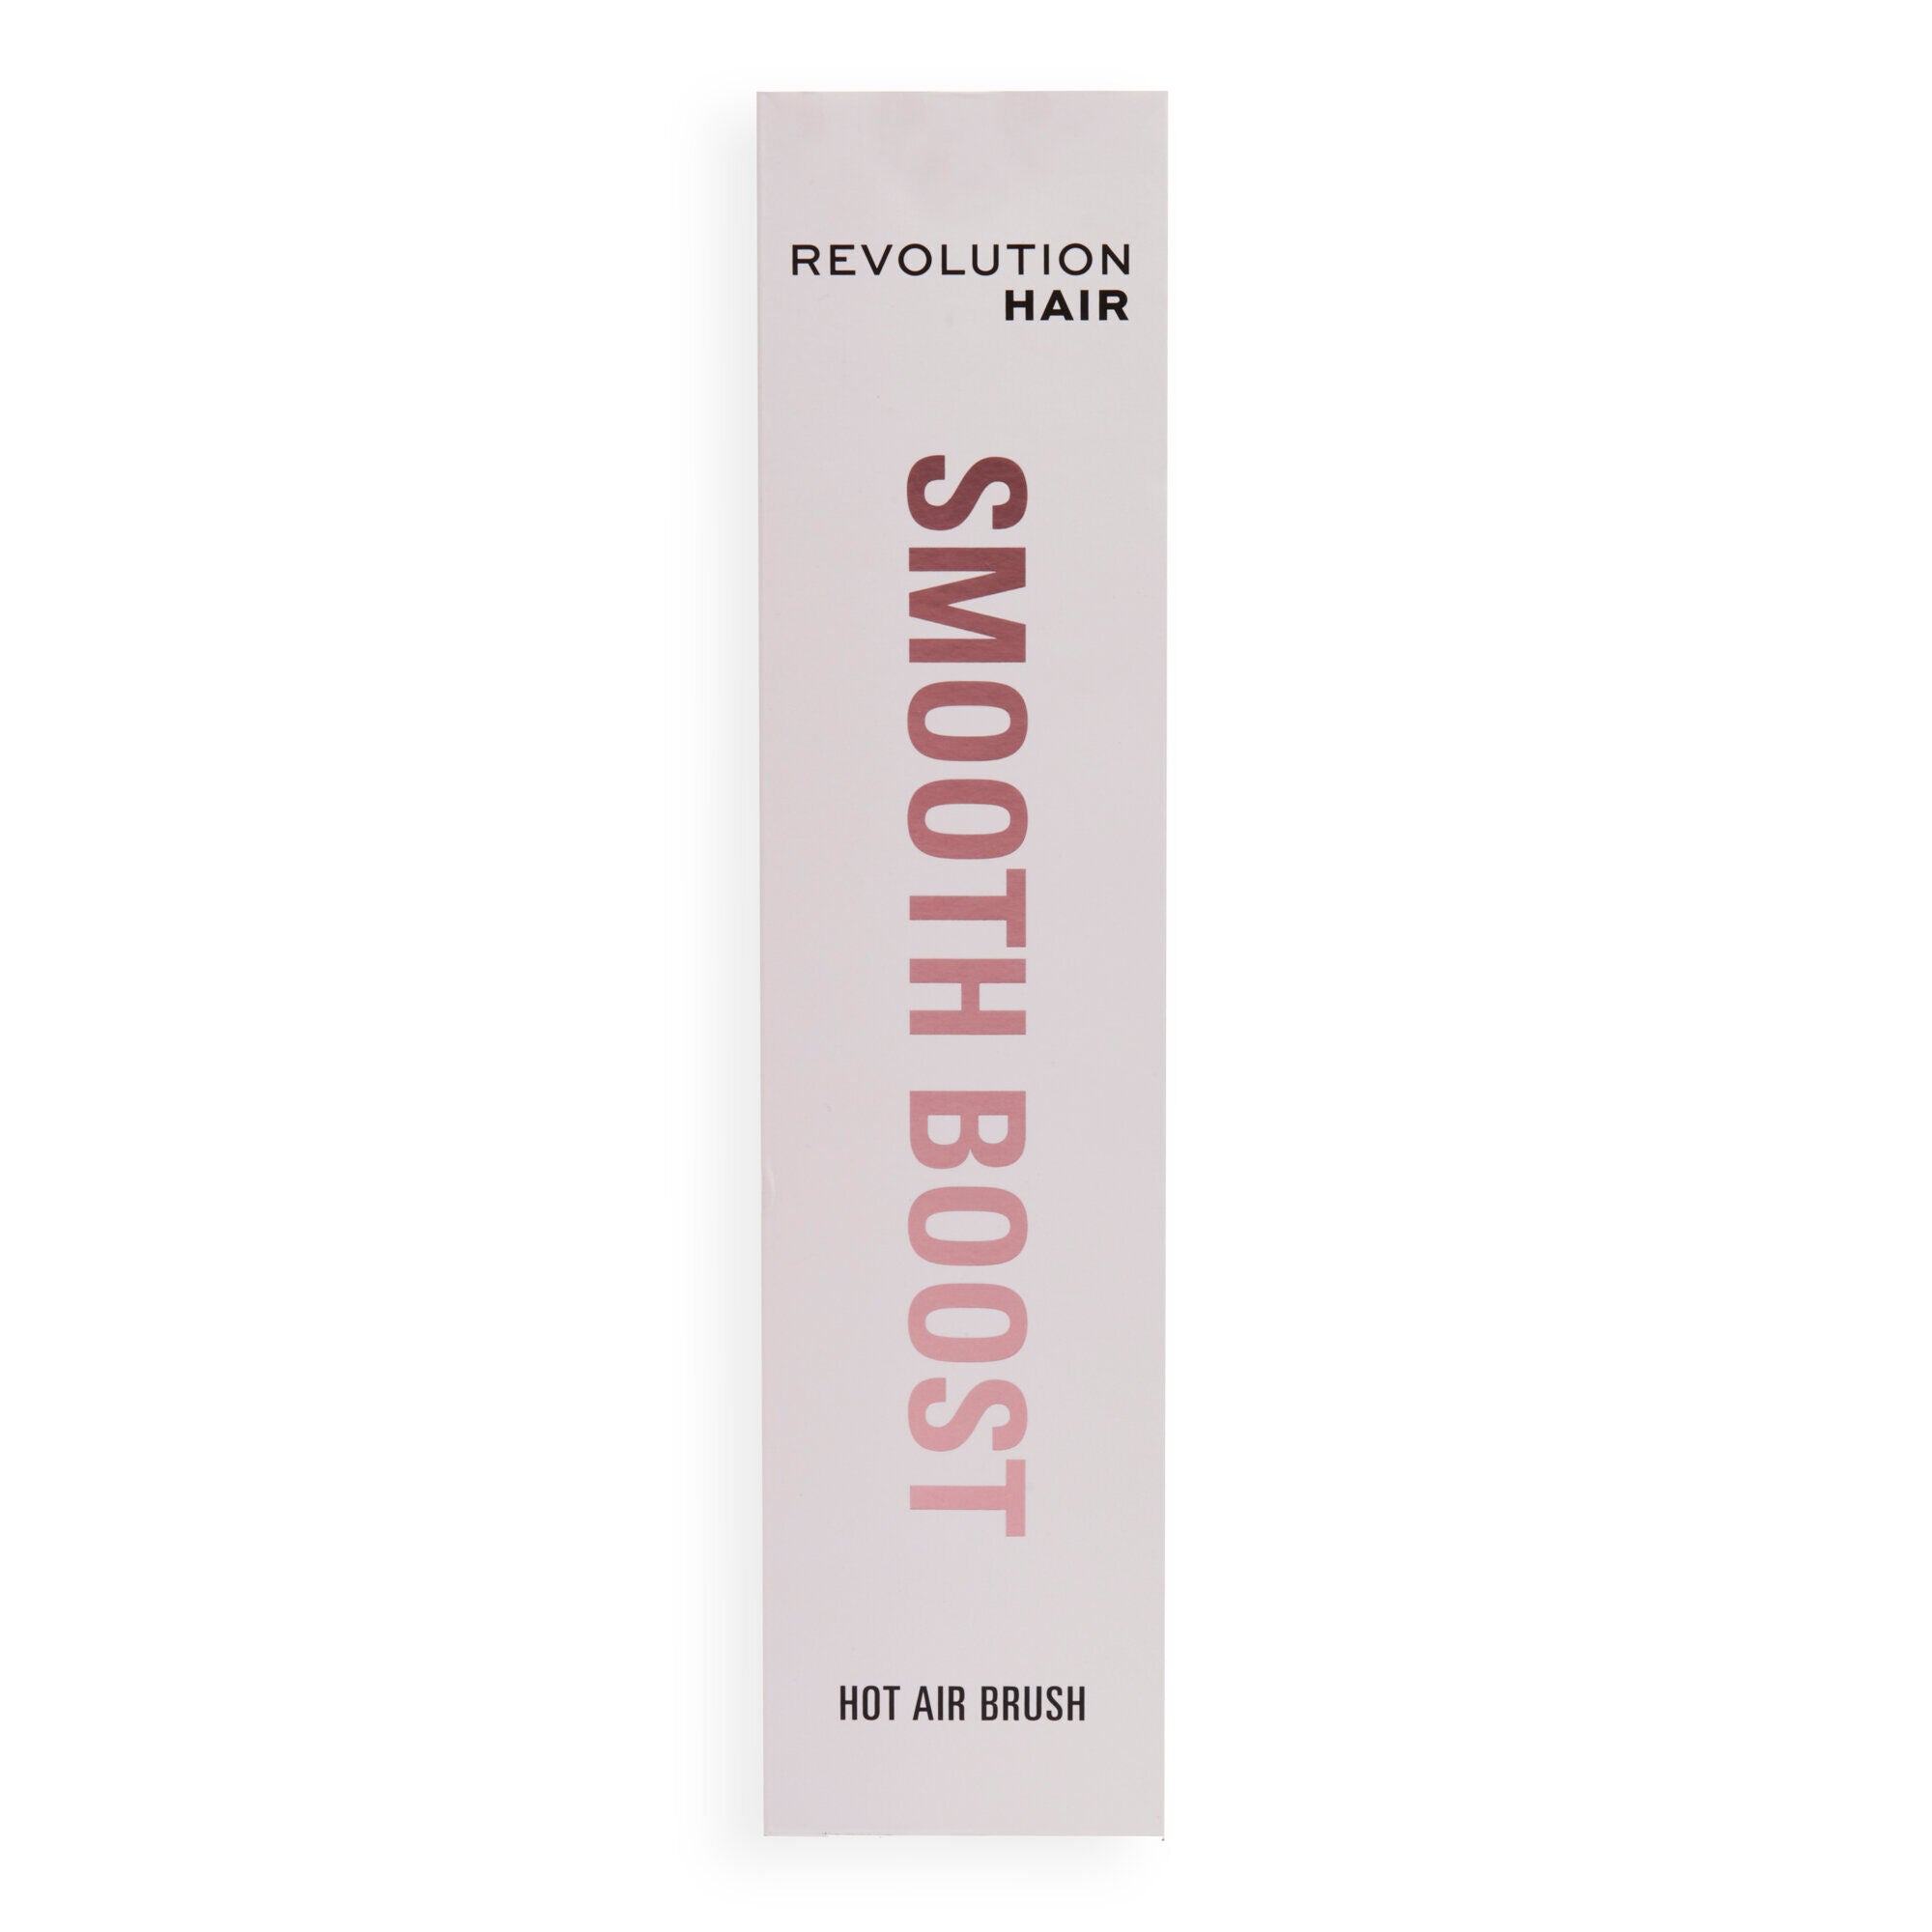 Revolution Haircare Smooth Boost Hot Air Brush, packaging